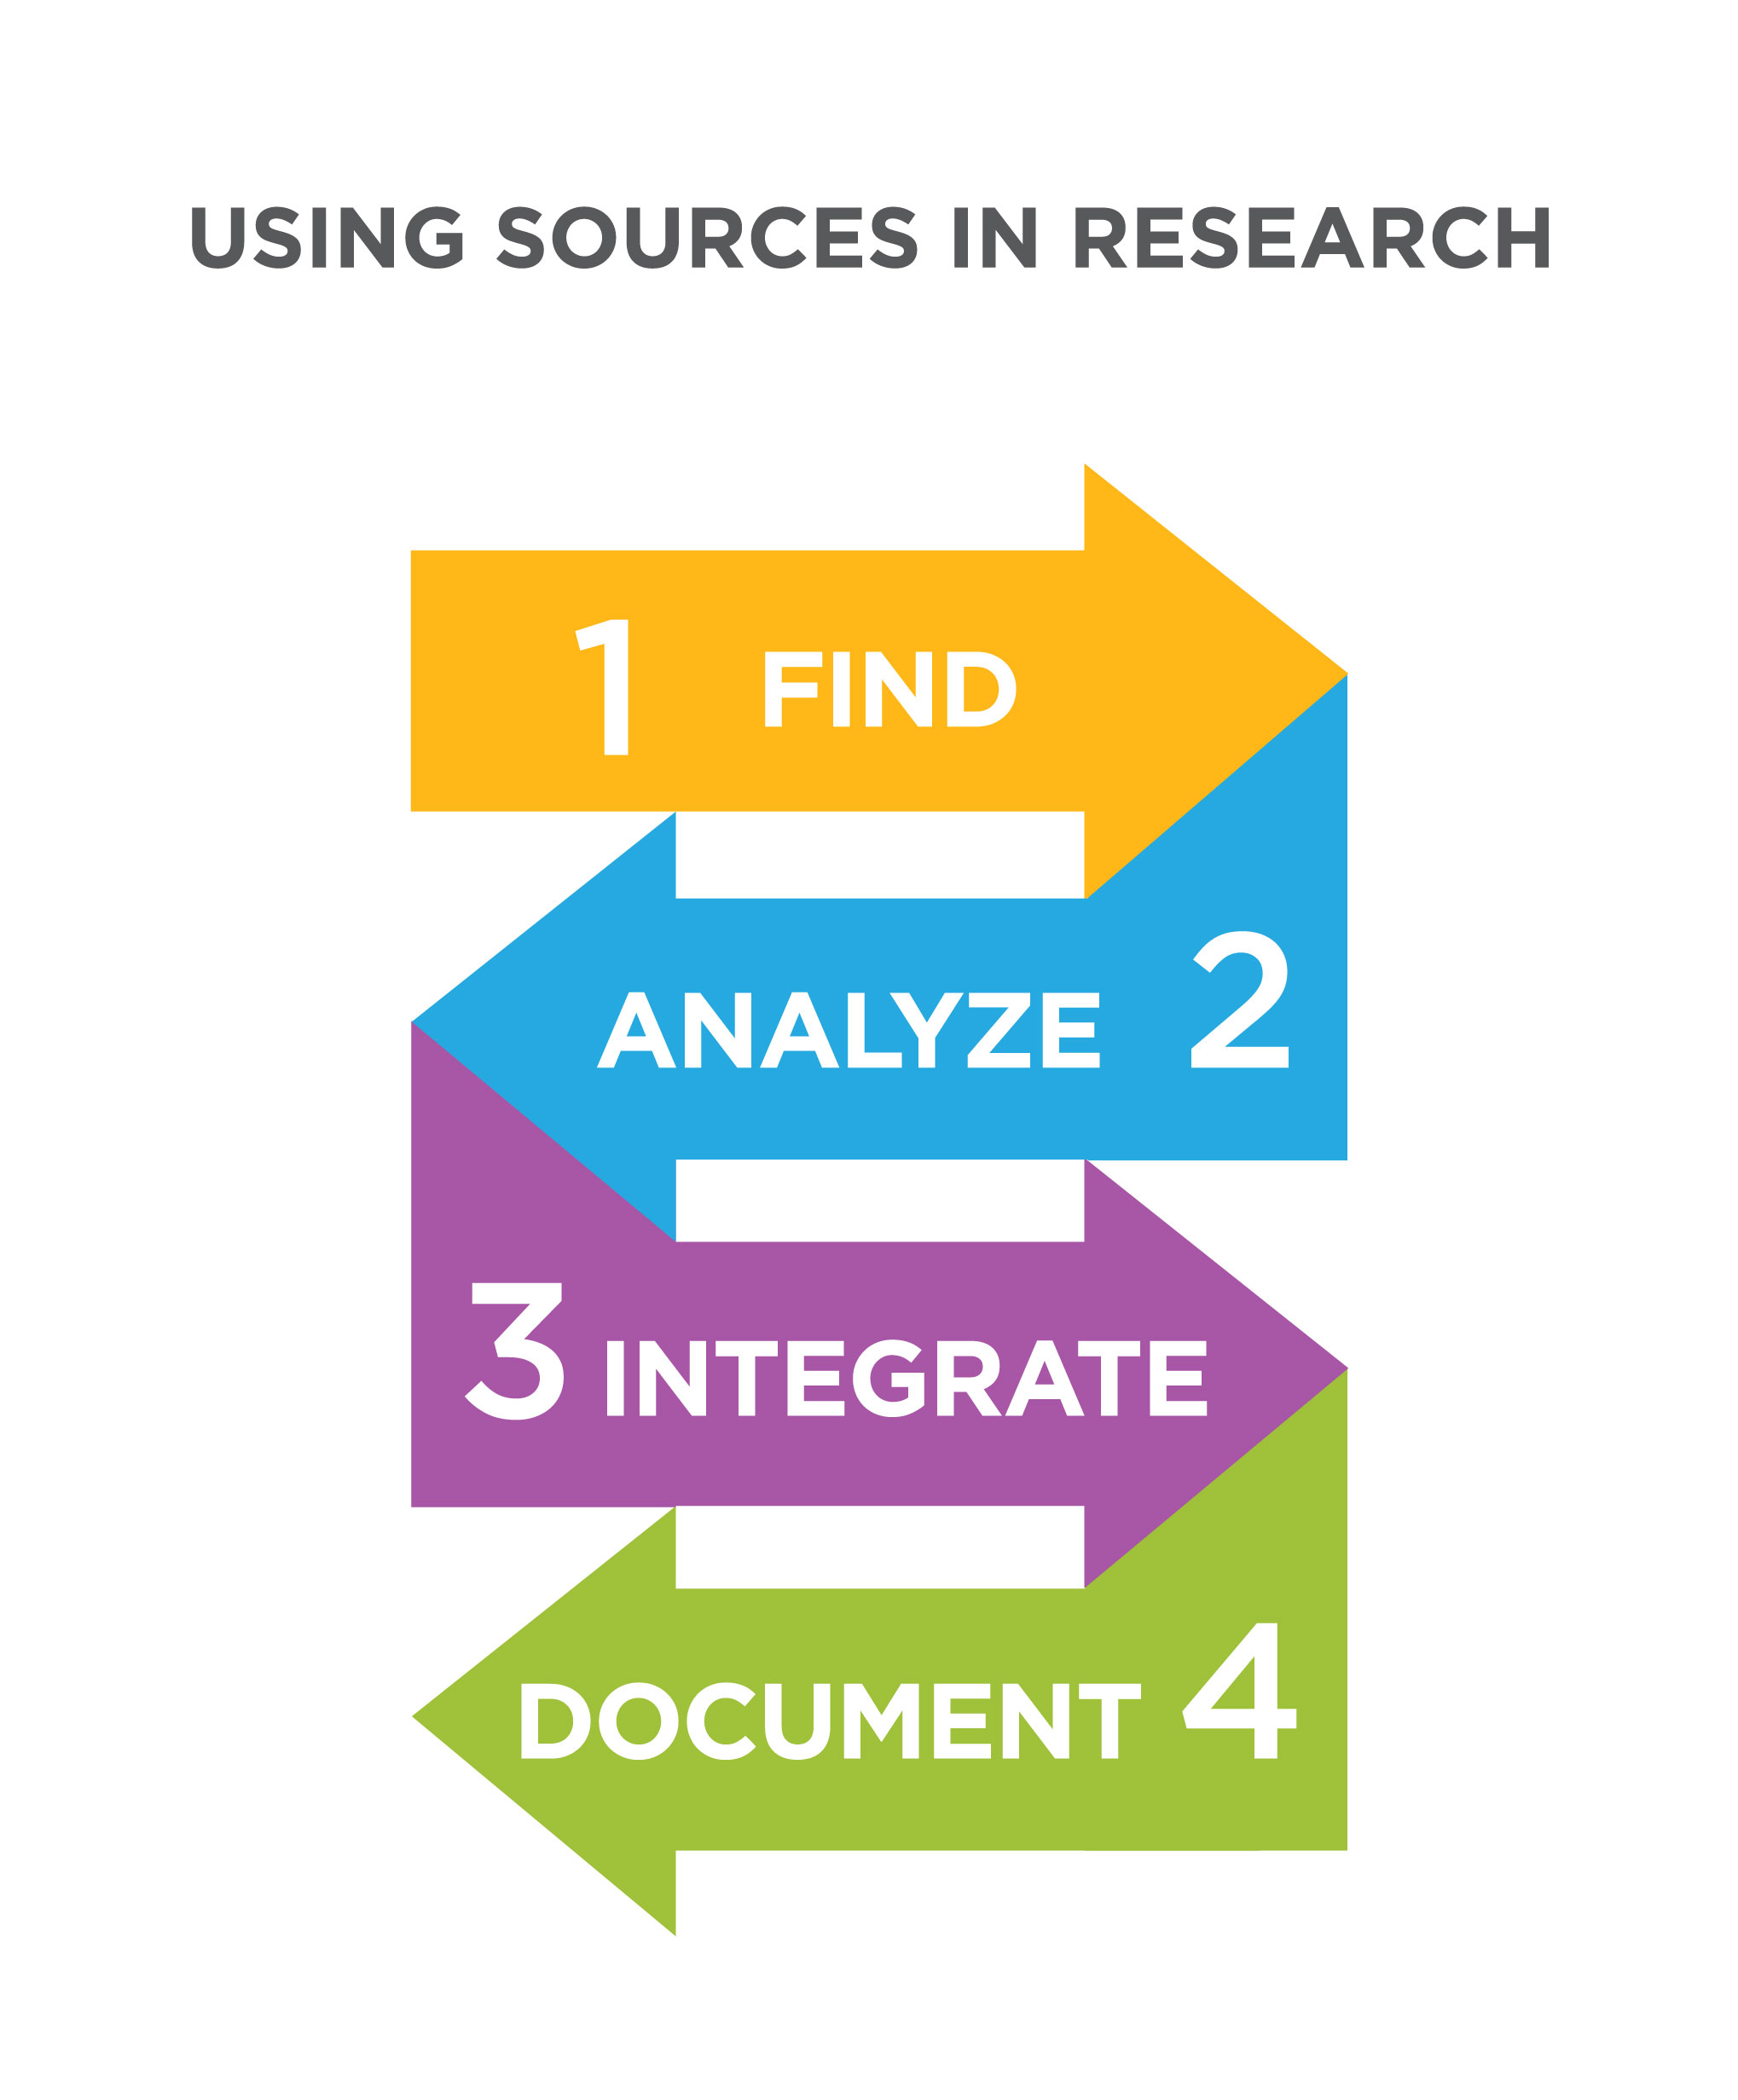 The steps of using sources in research: find, analyze, integrate, document.